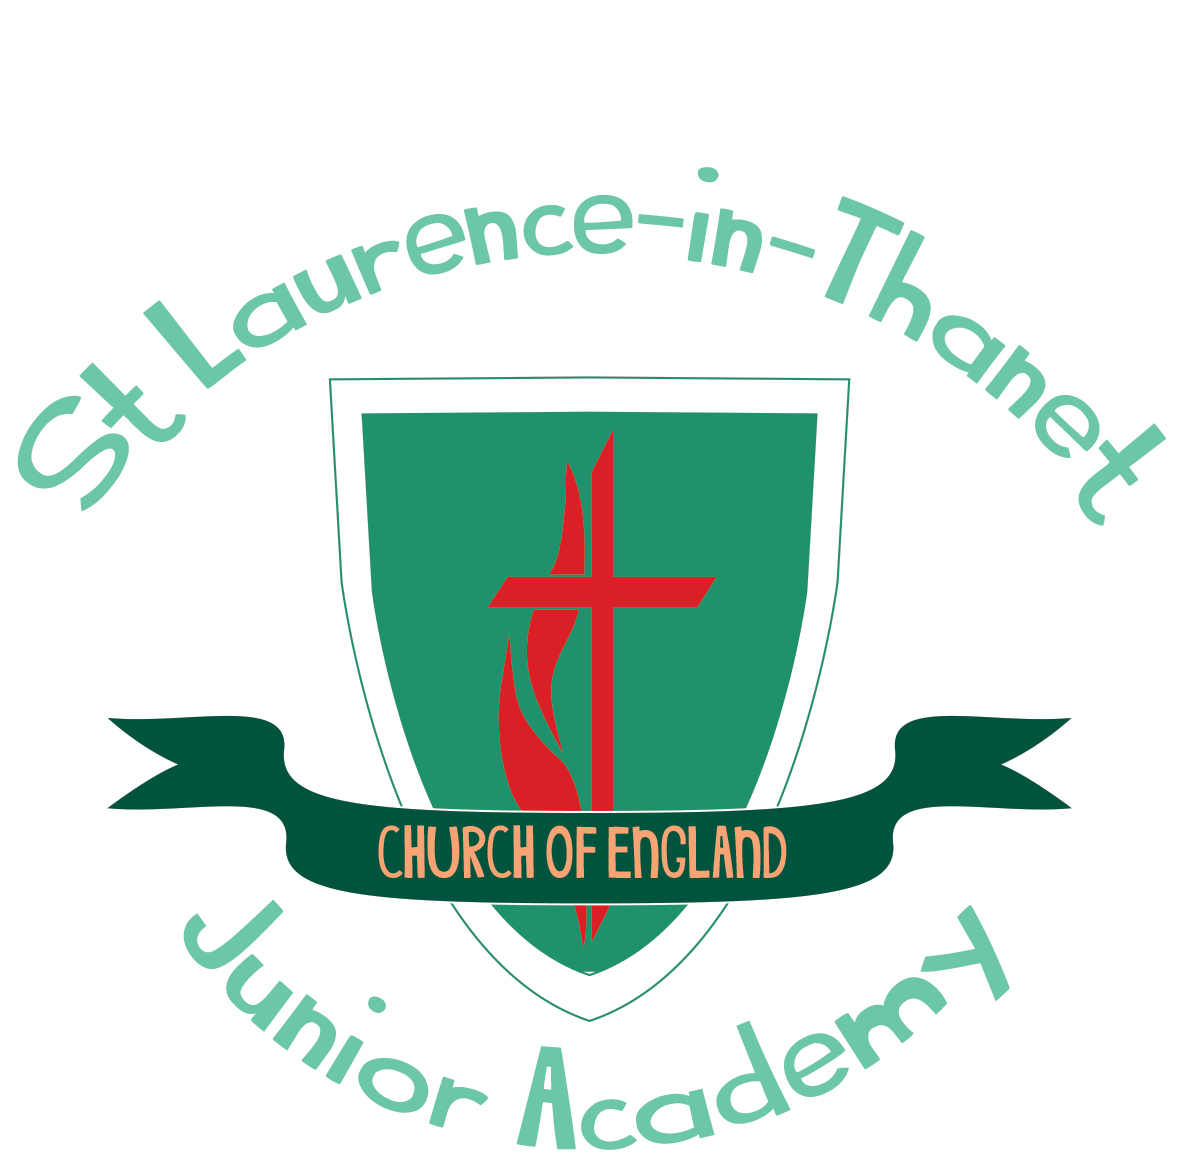 St Laurence in Thanet Church of England Junior Academy